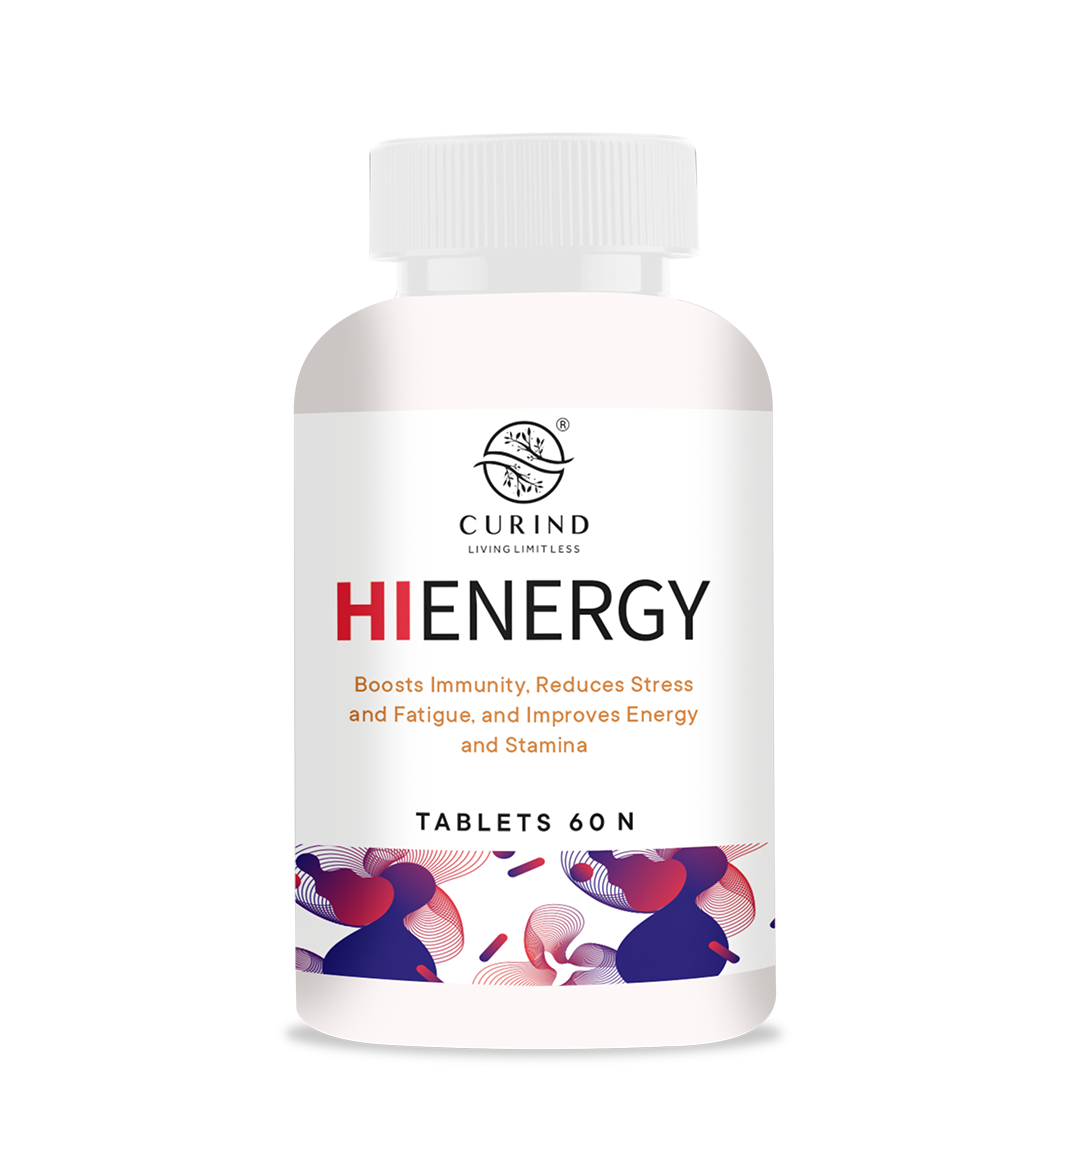 HI-ENERGY tablets boost immunity naturally, reduce fatigue and energize the body and mind